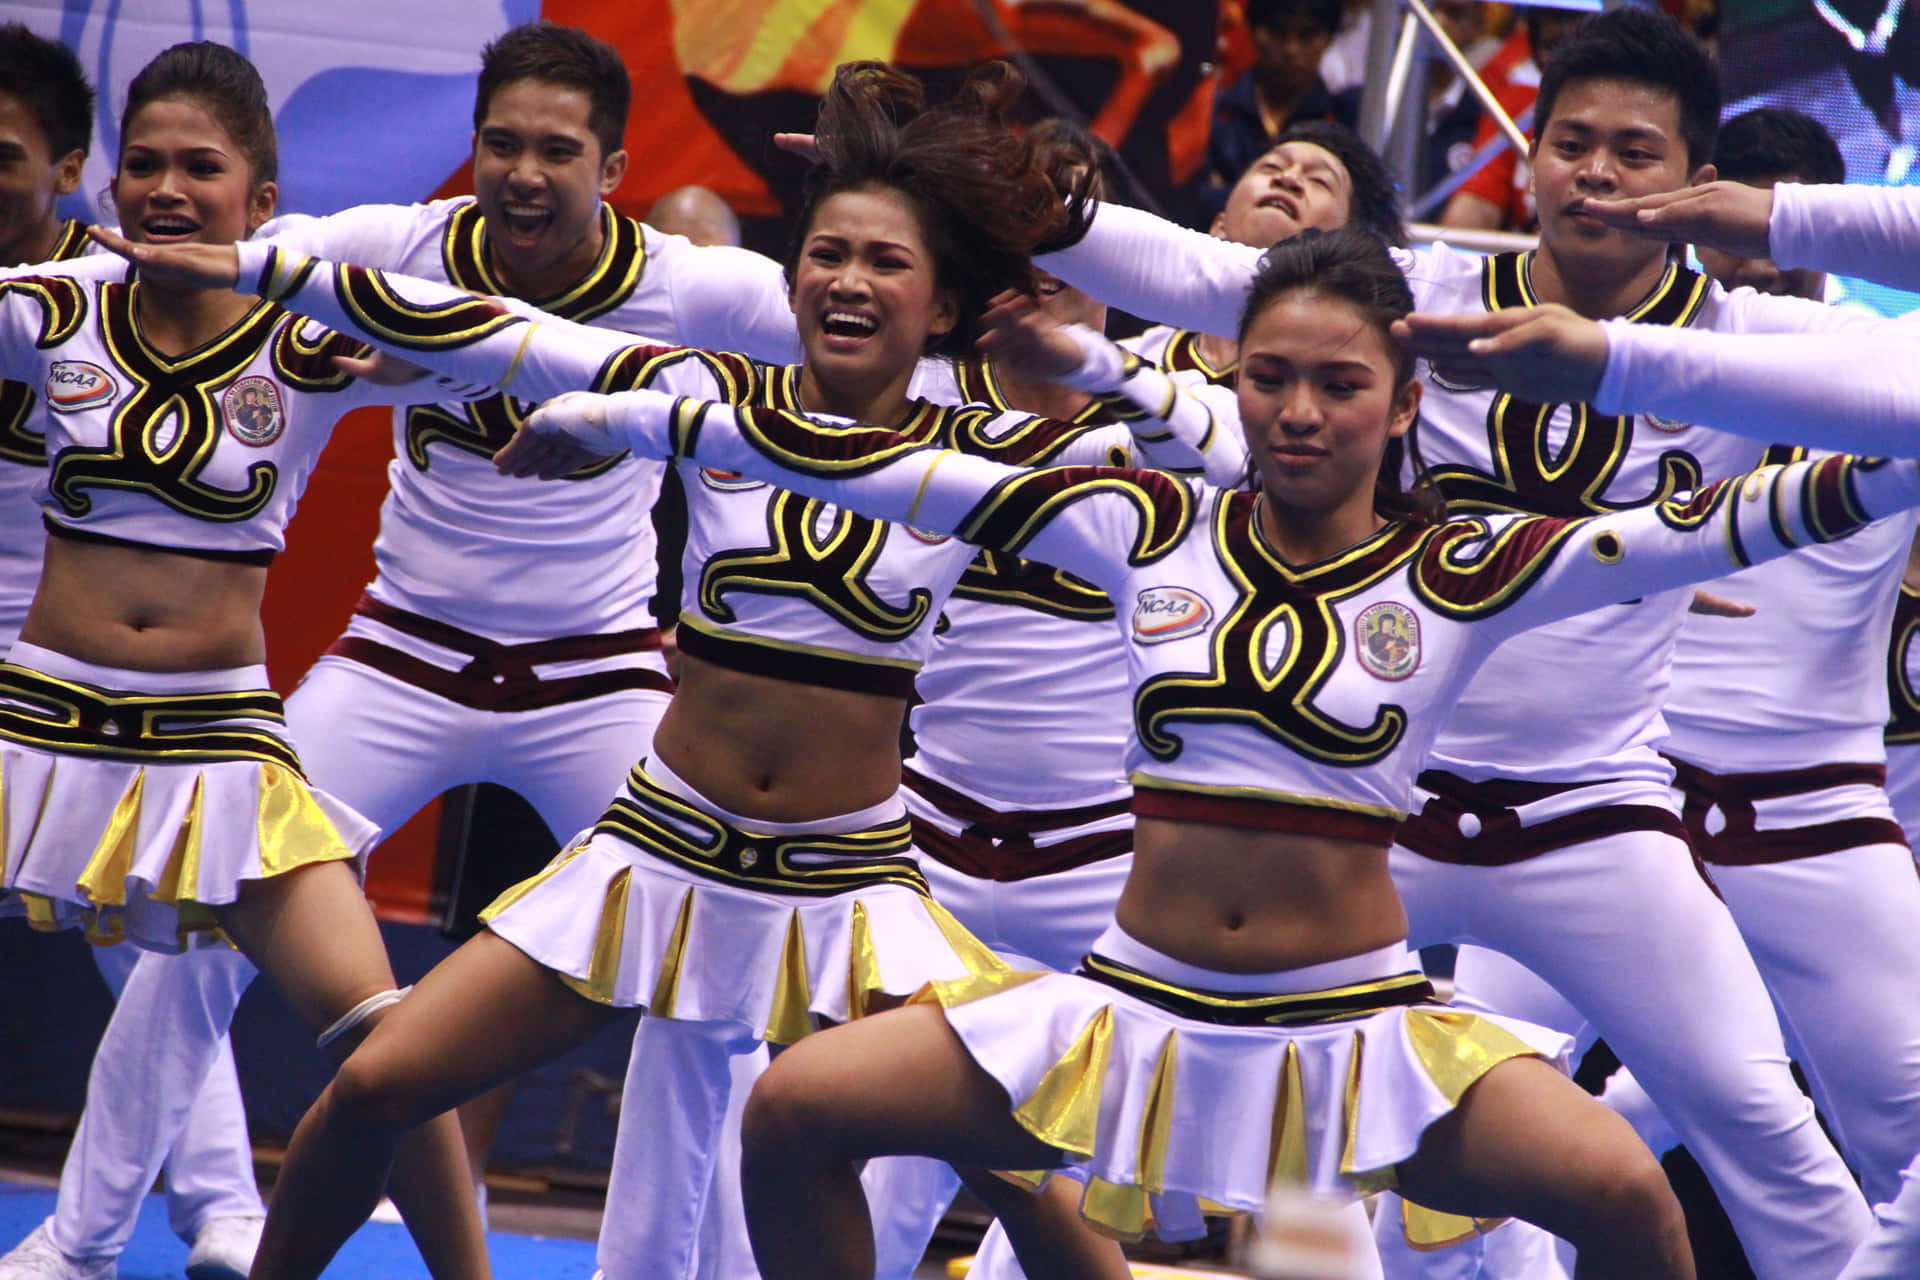 The Adrenaline and Excitement of Cheer